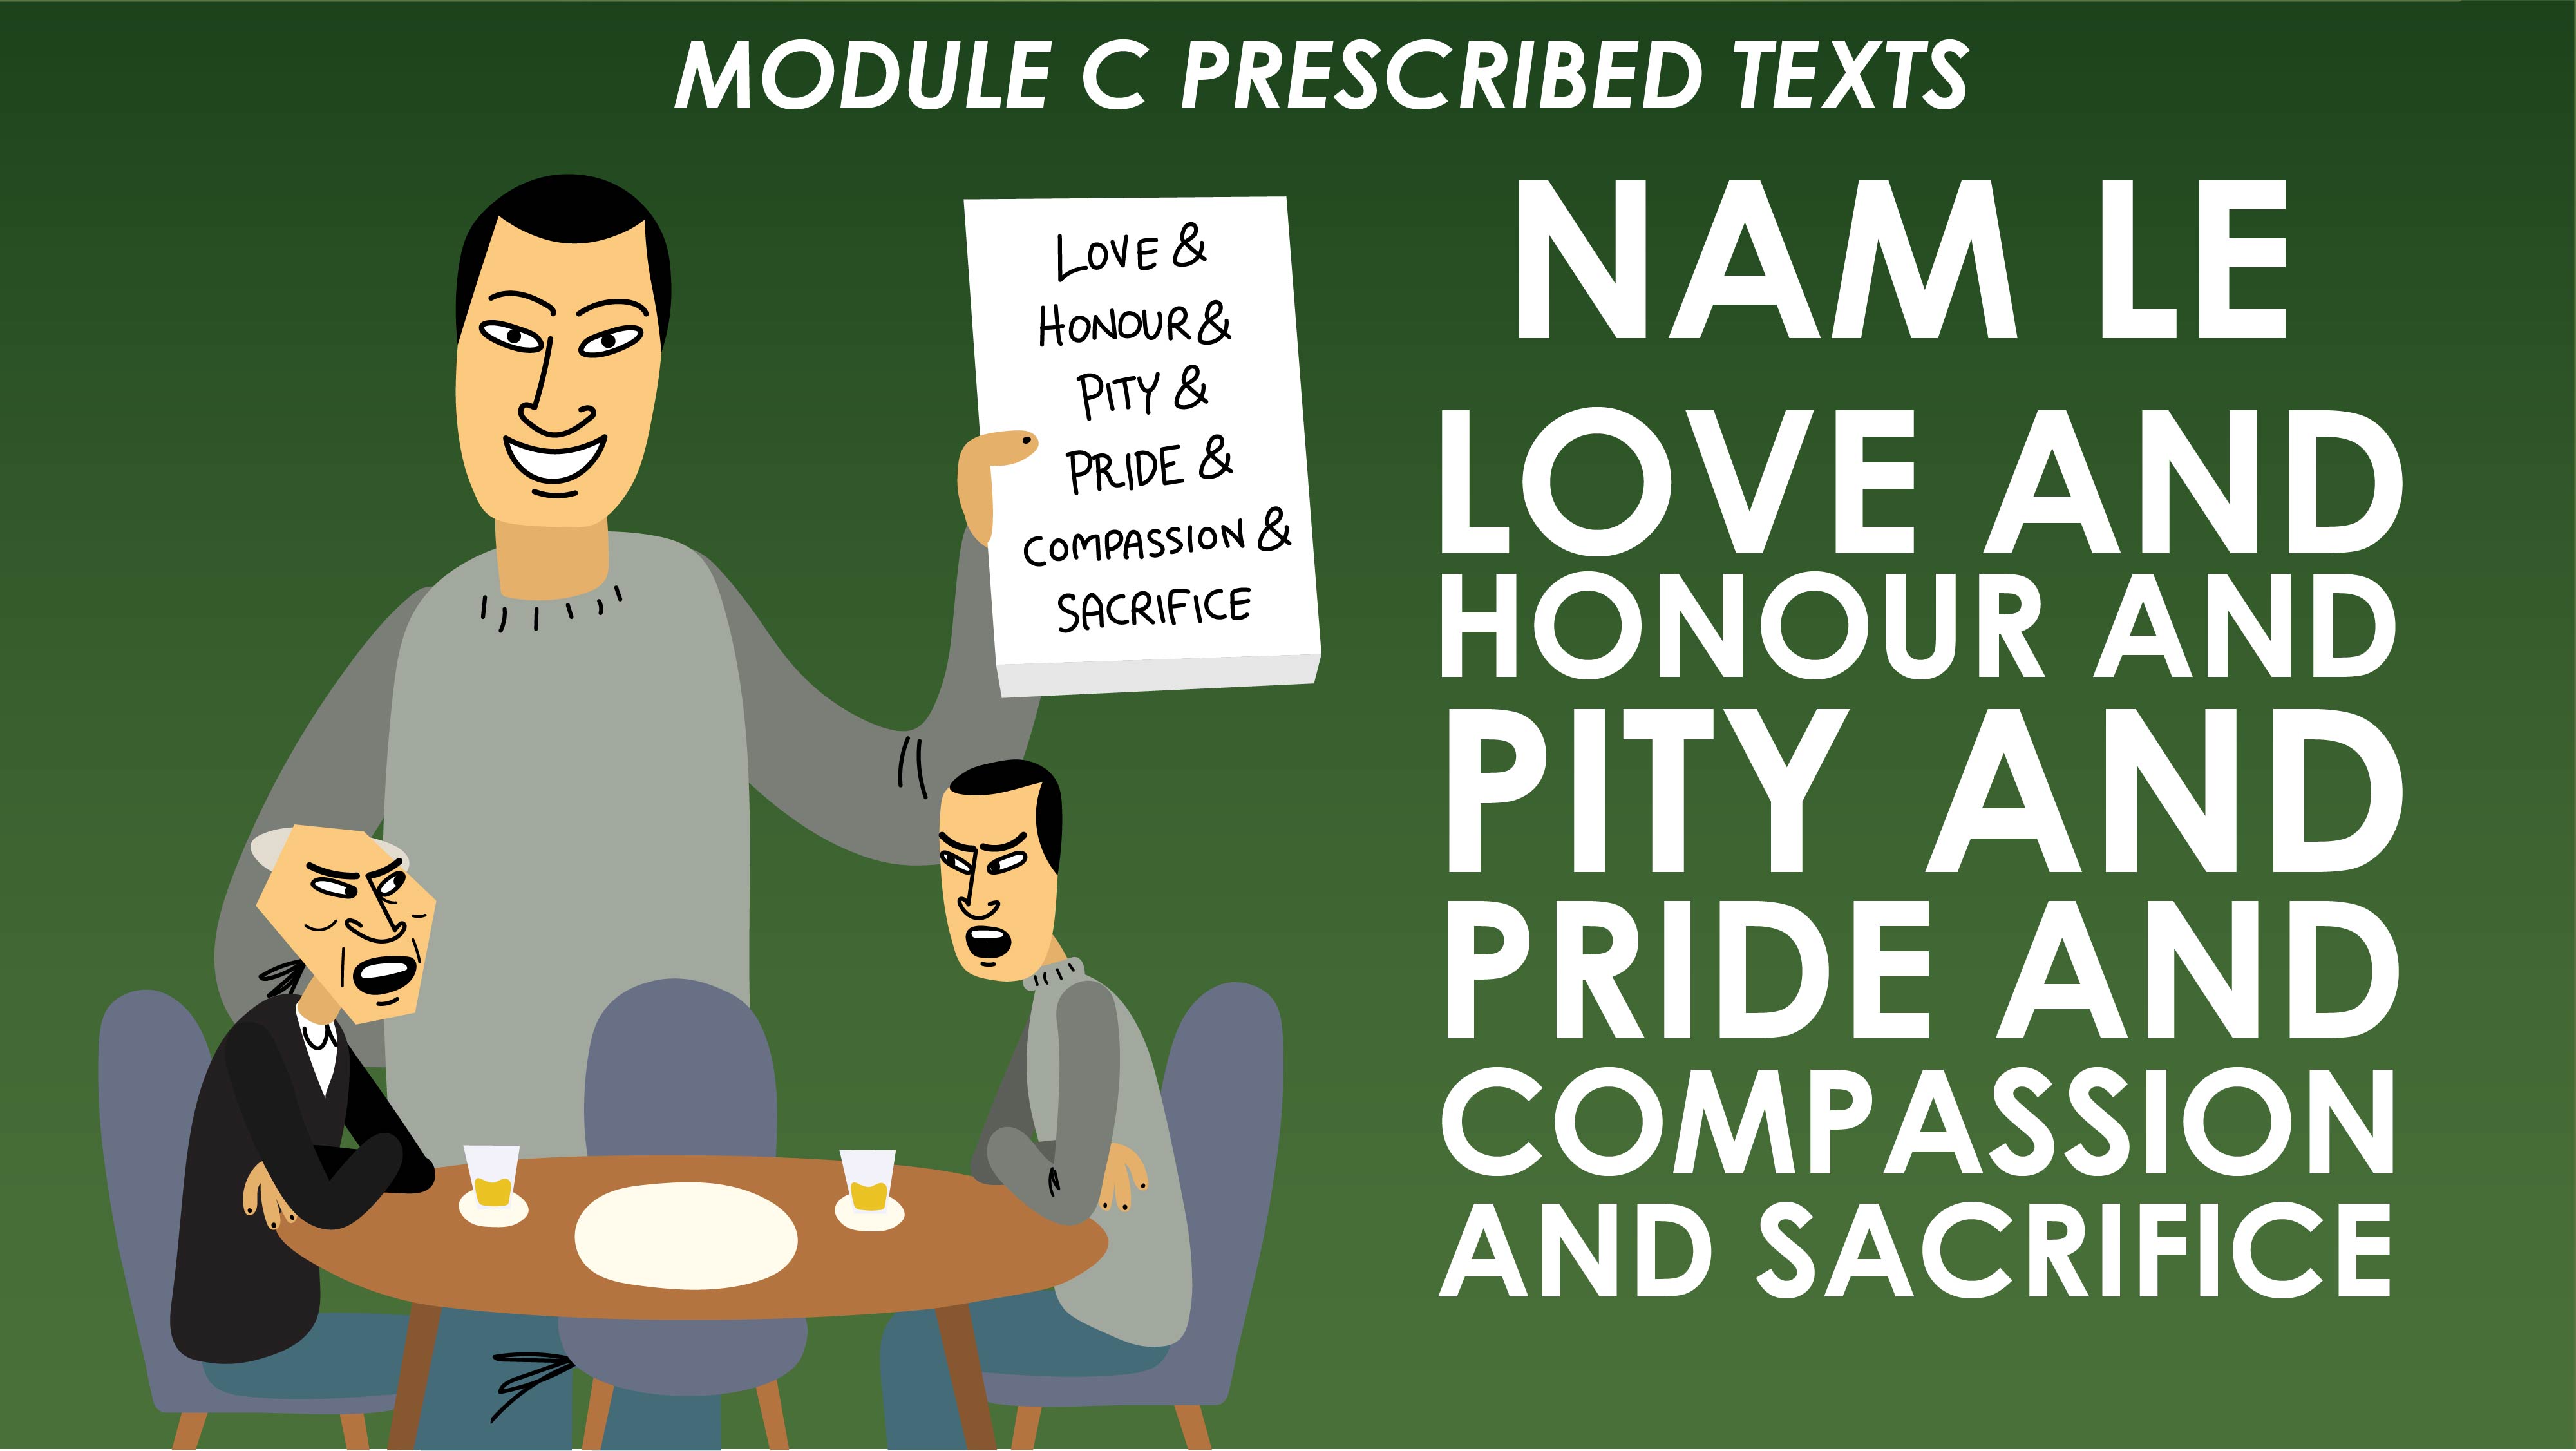 HSC English Advanced Module C - Nam Le - Love and Honour and Pity and Pride and Compassion and Sacrifice